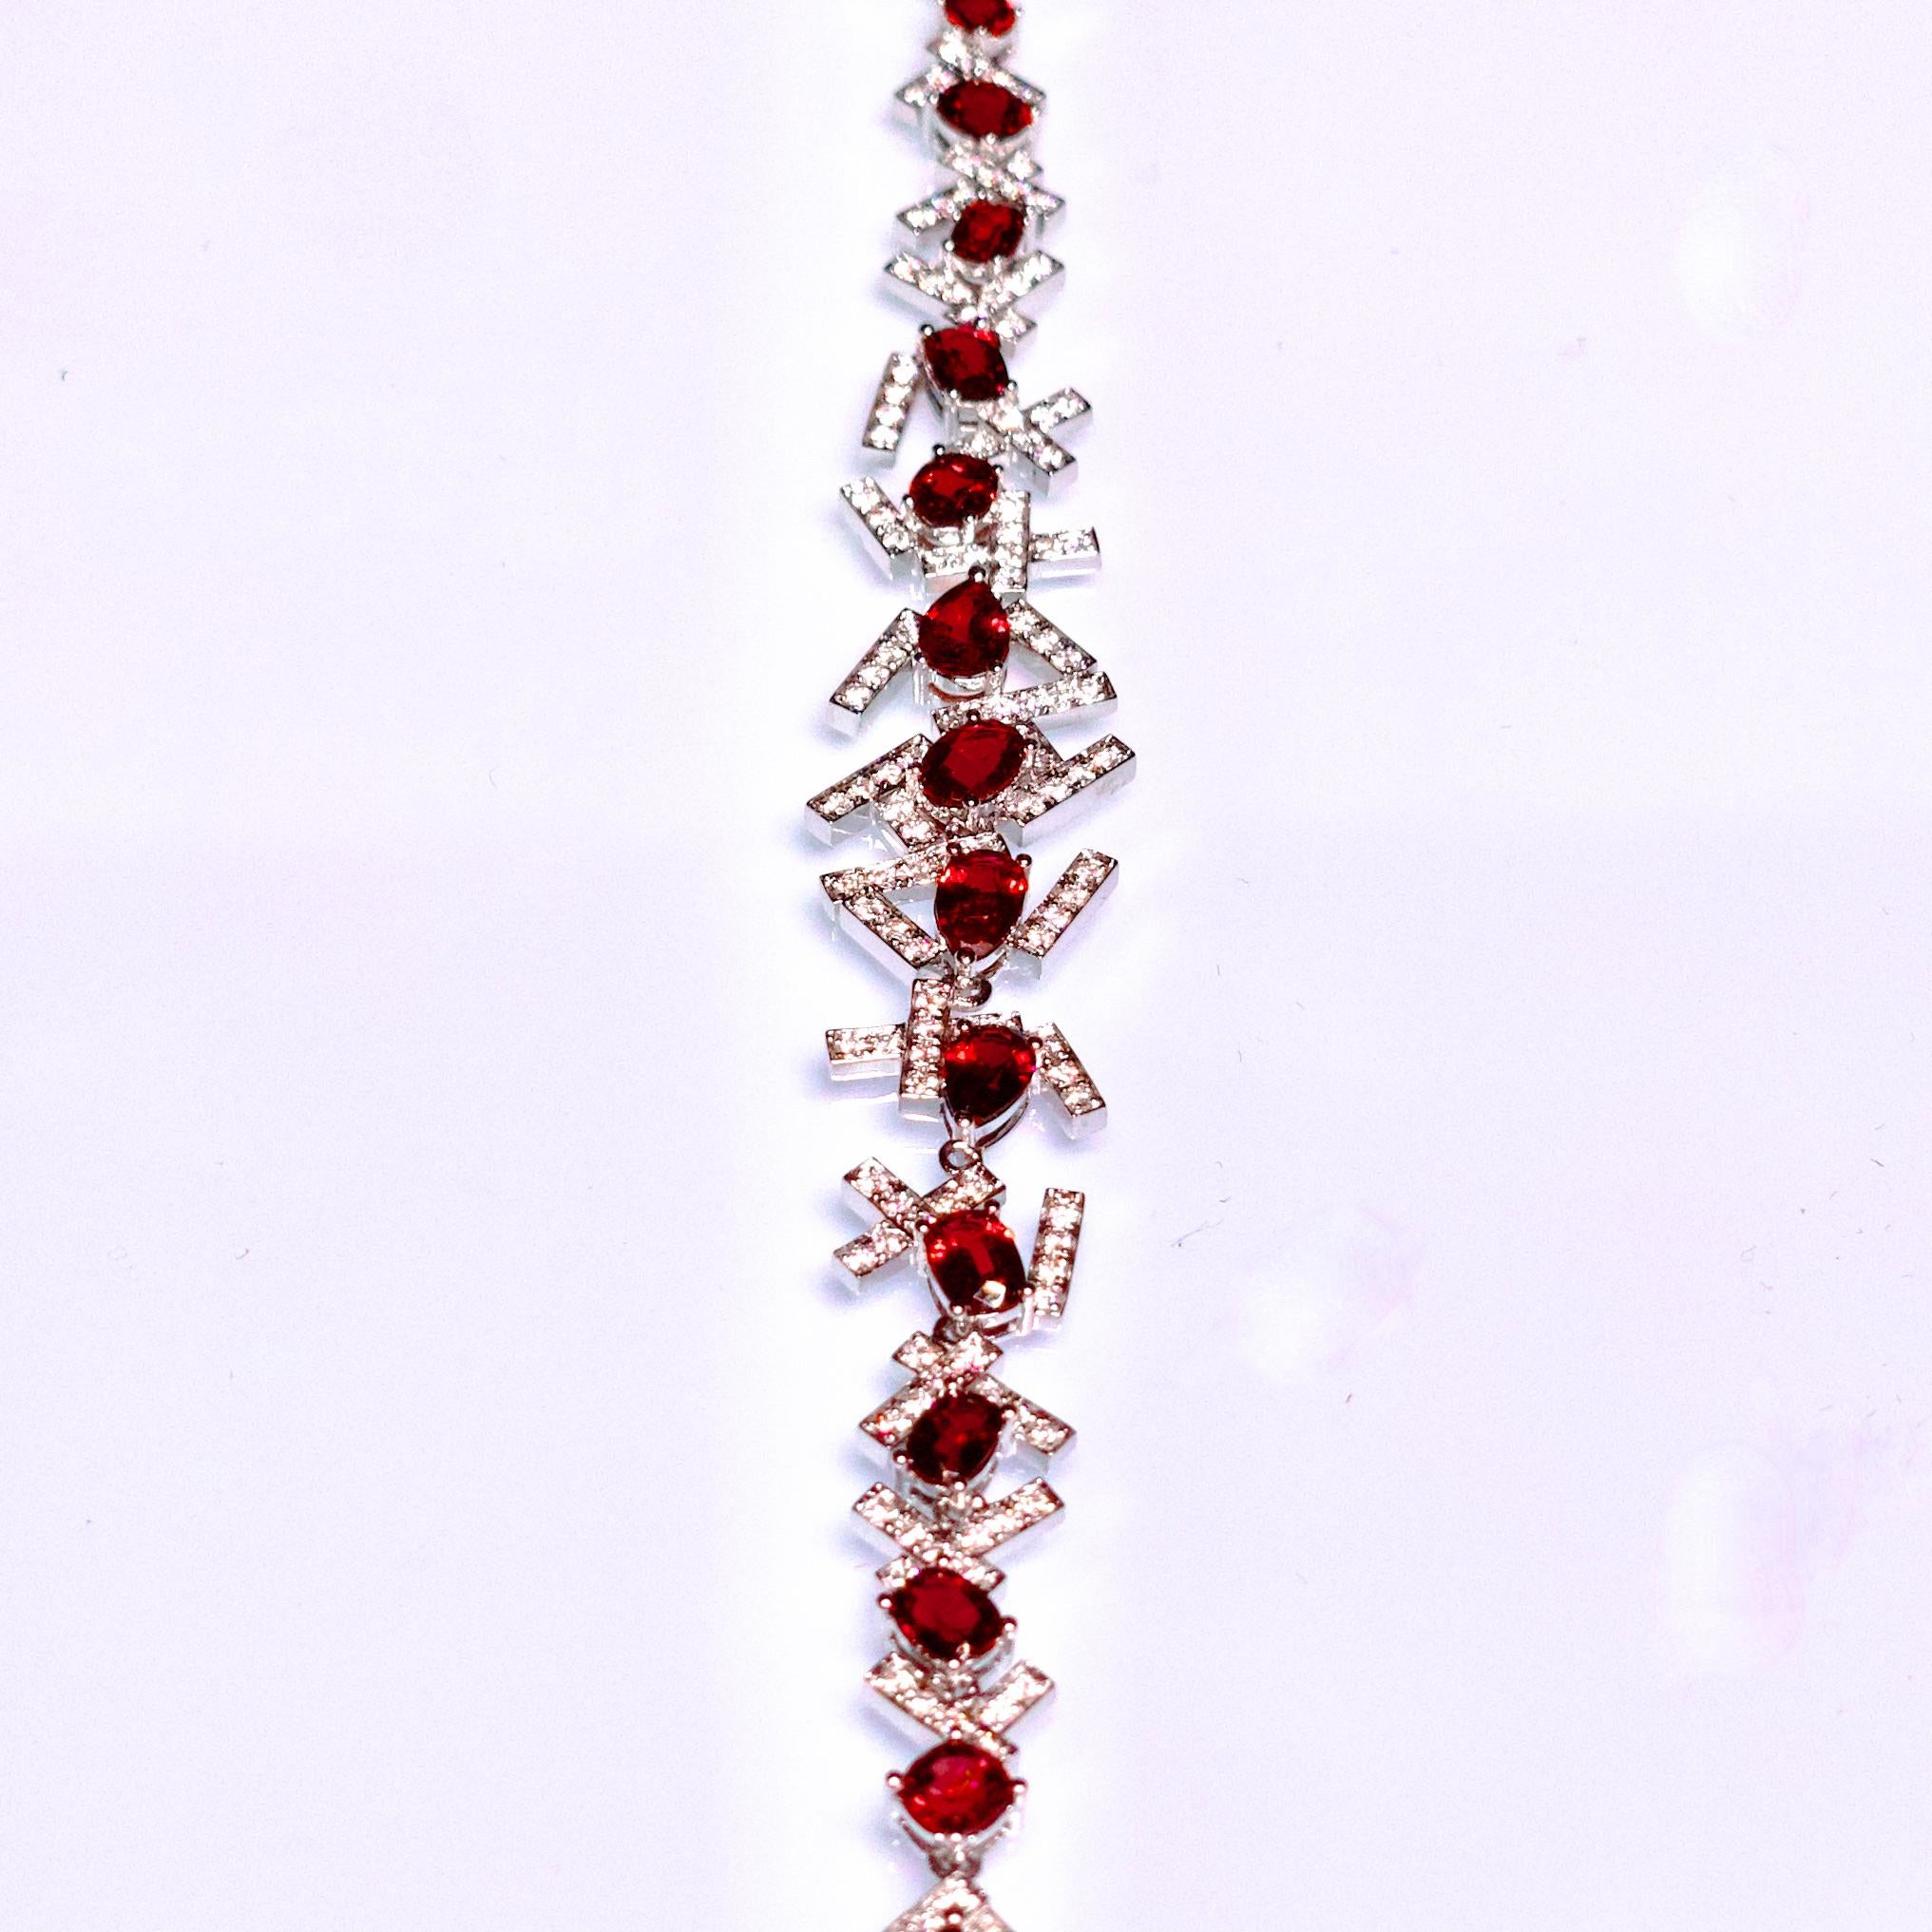 A 5.3 ct Spinel and Diamond Bracelet in 18k White Gold
It consists of 5.3 ct Intense Red Spinel of Burma origin, with no indication of heating 
Total diamond weight 1.484 ct , The Colour of the Diamond is Approximately E/F With VS Clarity
The